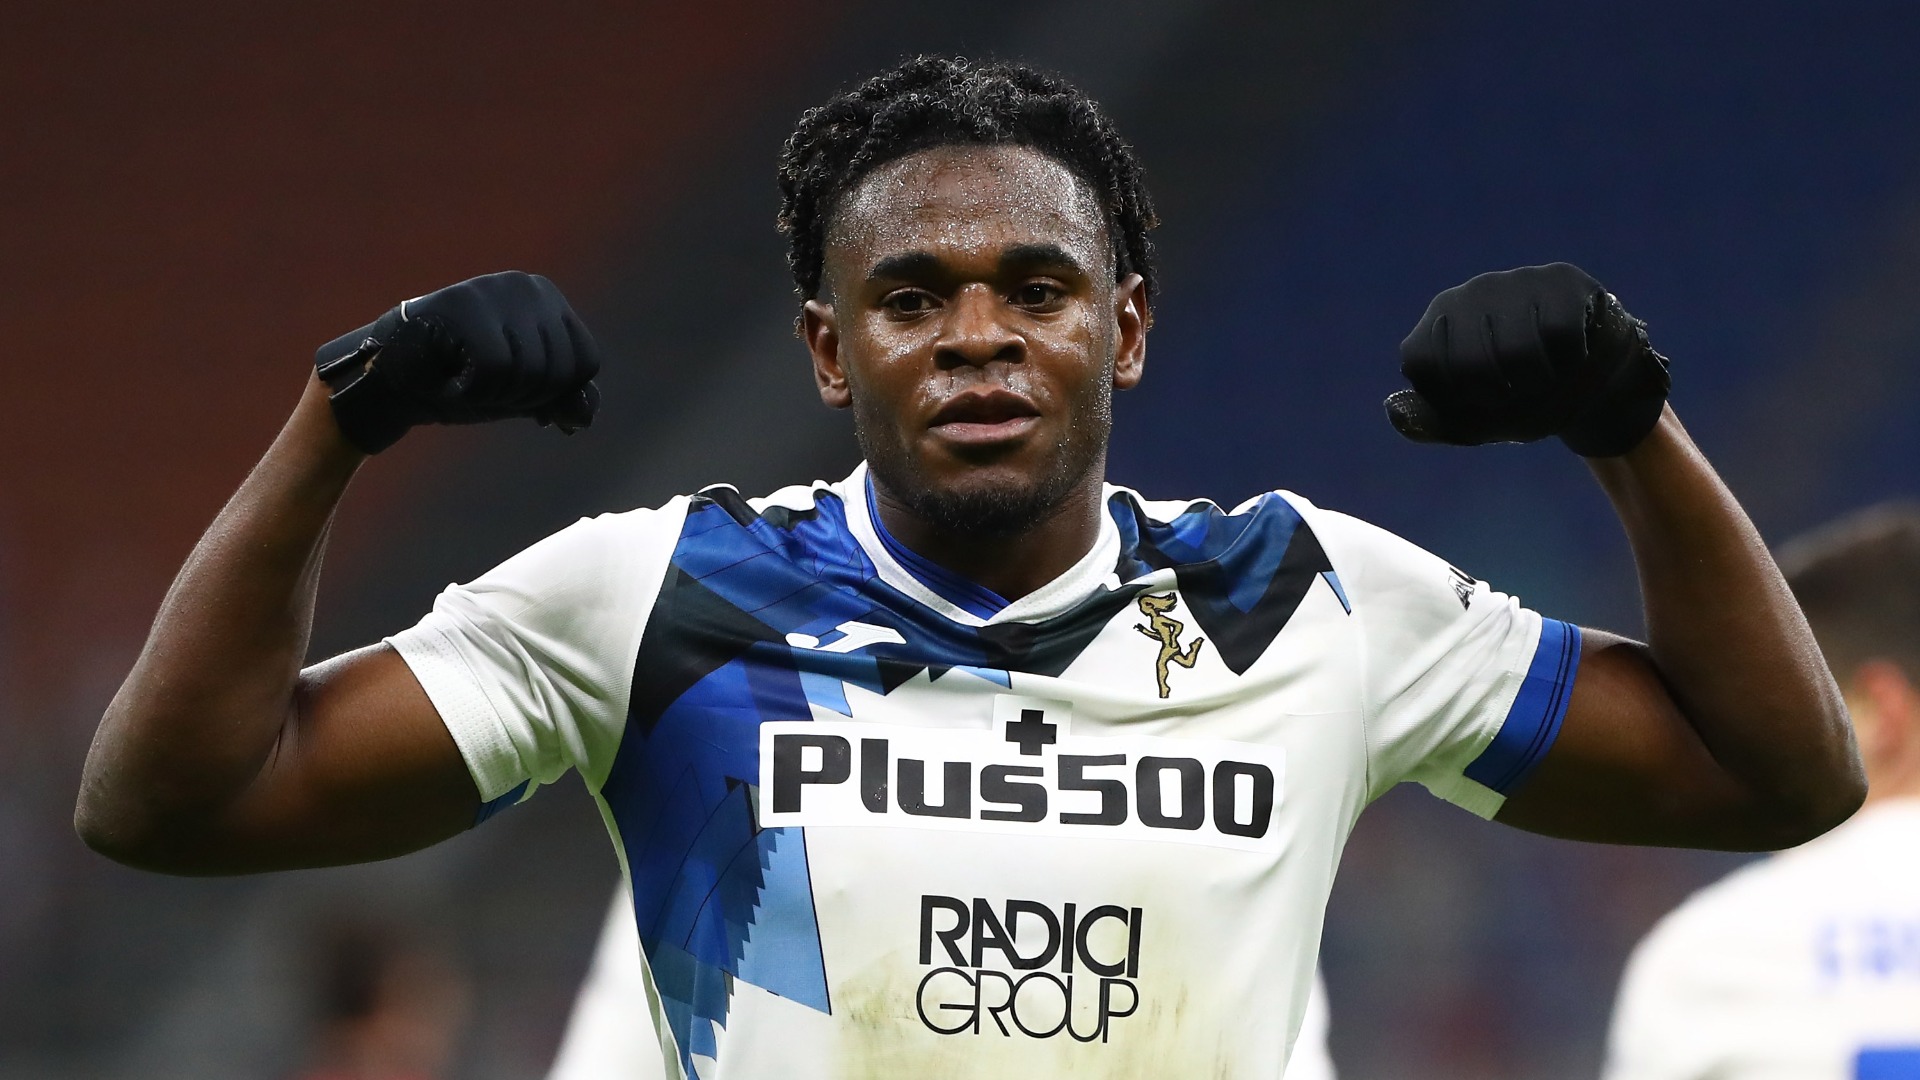 Duvan Zapata has been a key player for Atalanta since arriving in 2018